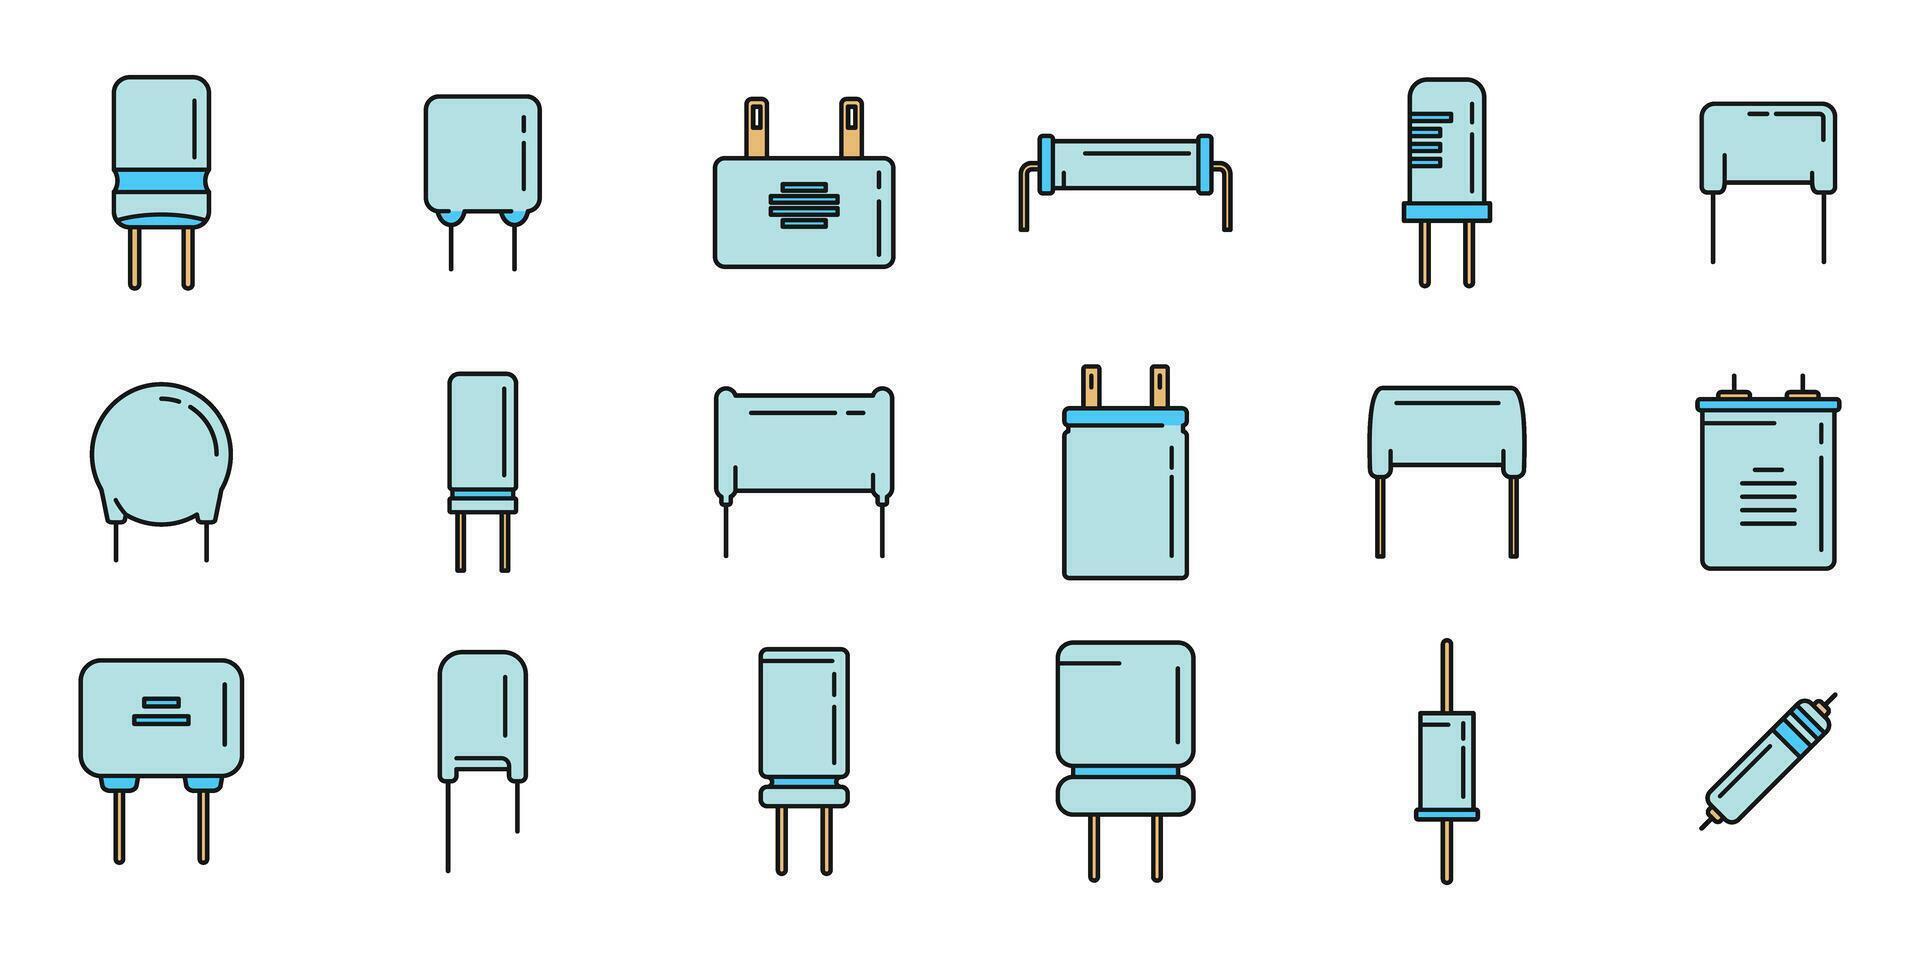 Capacitor icons set vector color